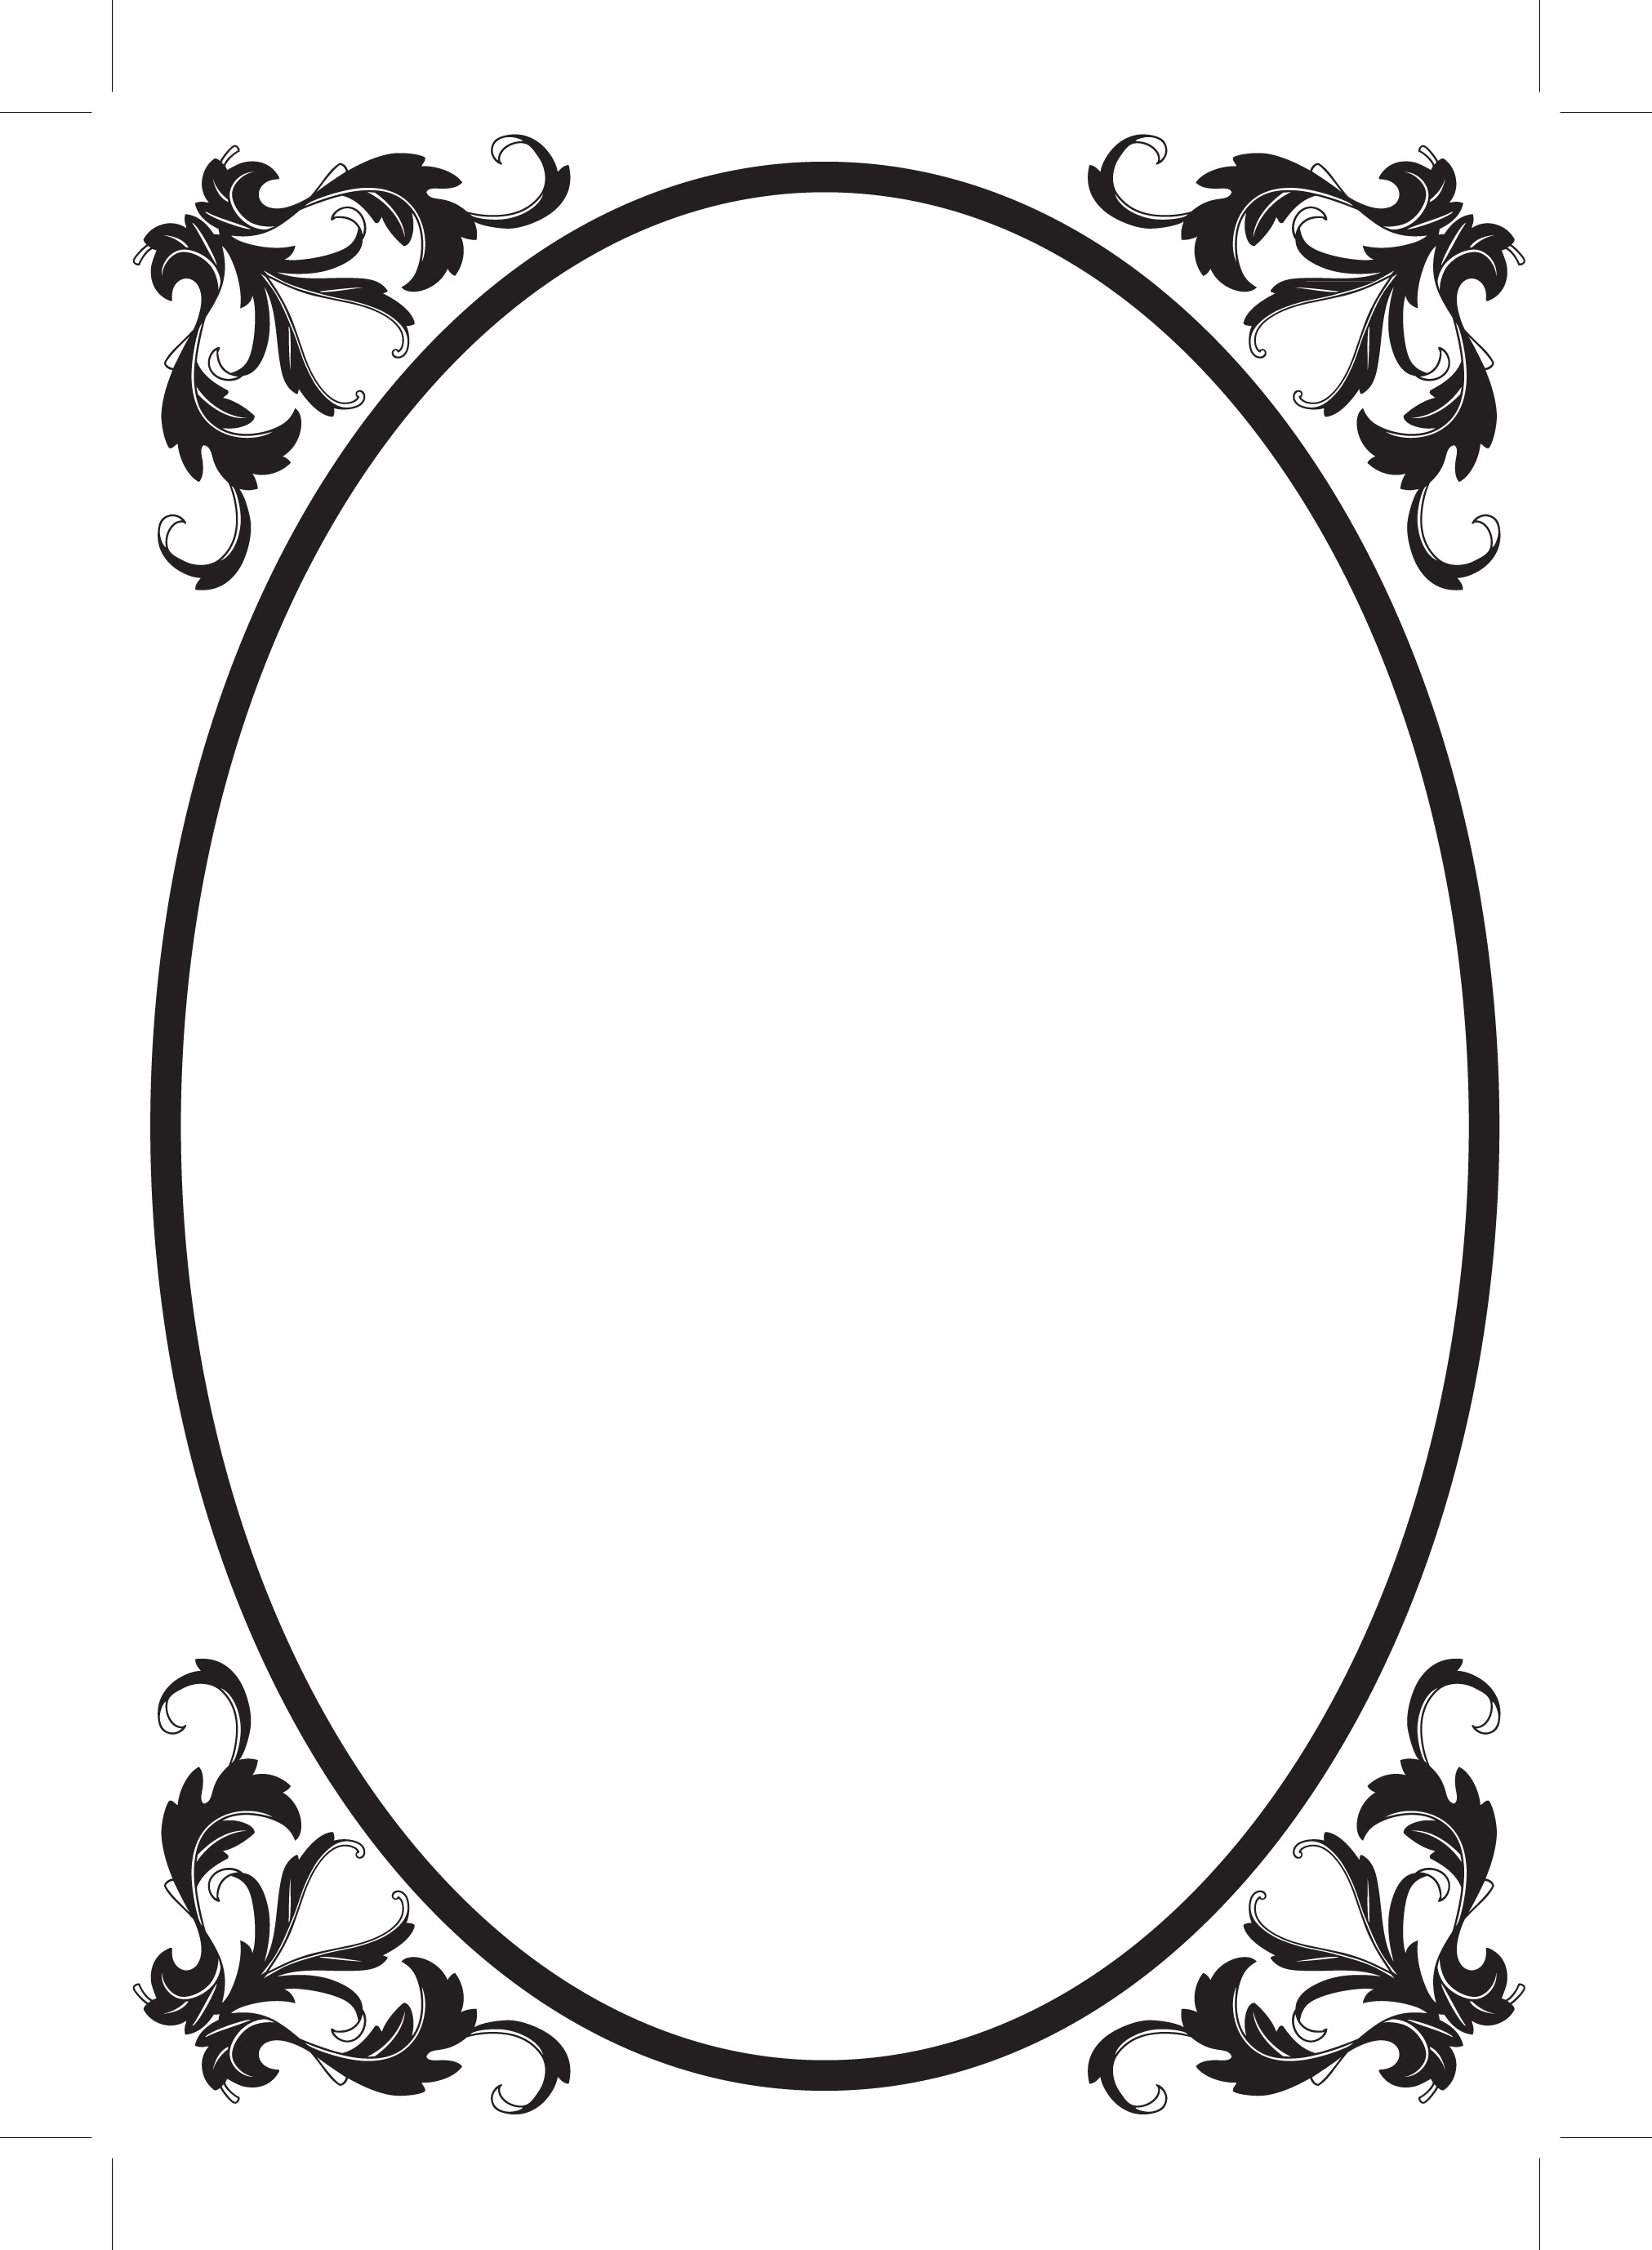 Oval outline clipart